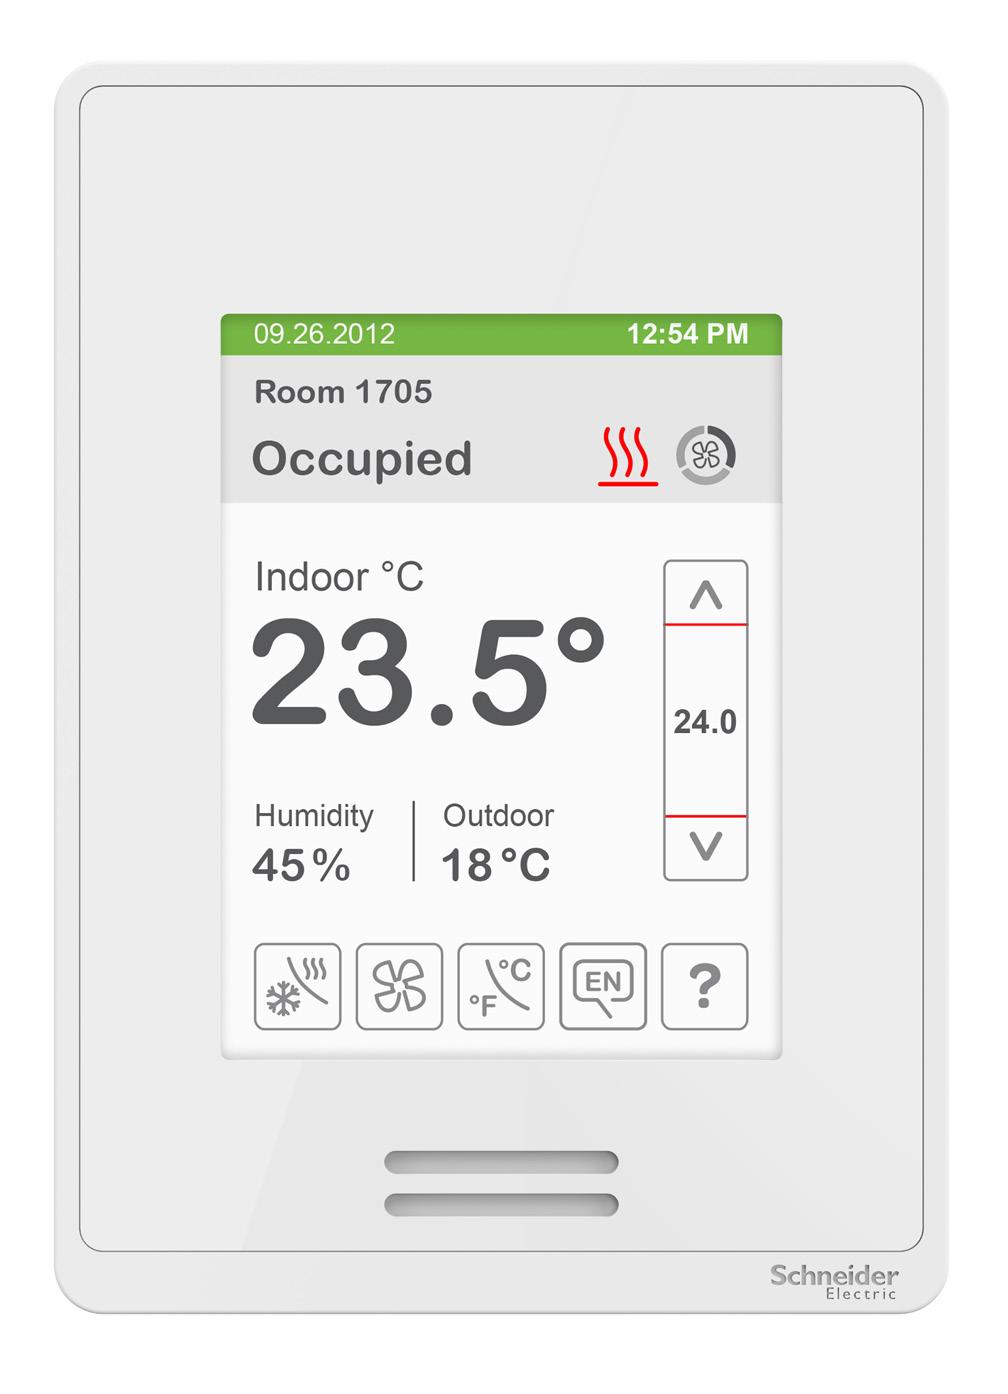 11 HOME SCREEN DISPLAY Hospitality User Interface Shown Date Short Network Message Occupancy Status Time System Status Fan Status Room Indoor Temperature Room Indoor Humidity Outdoor Temperature Up